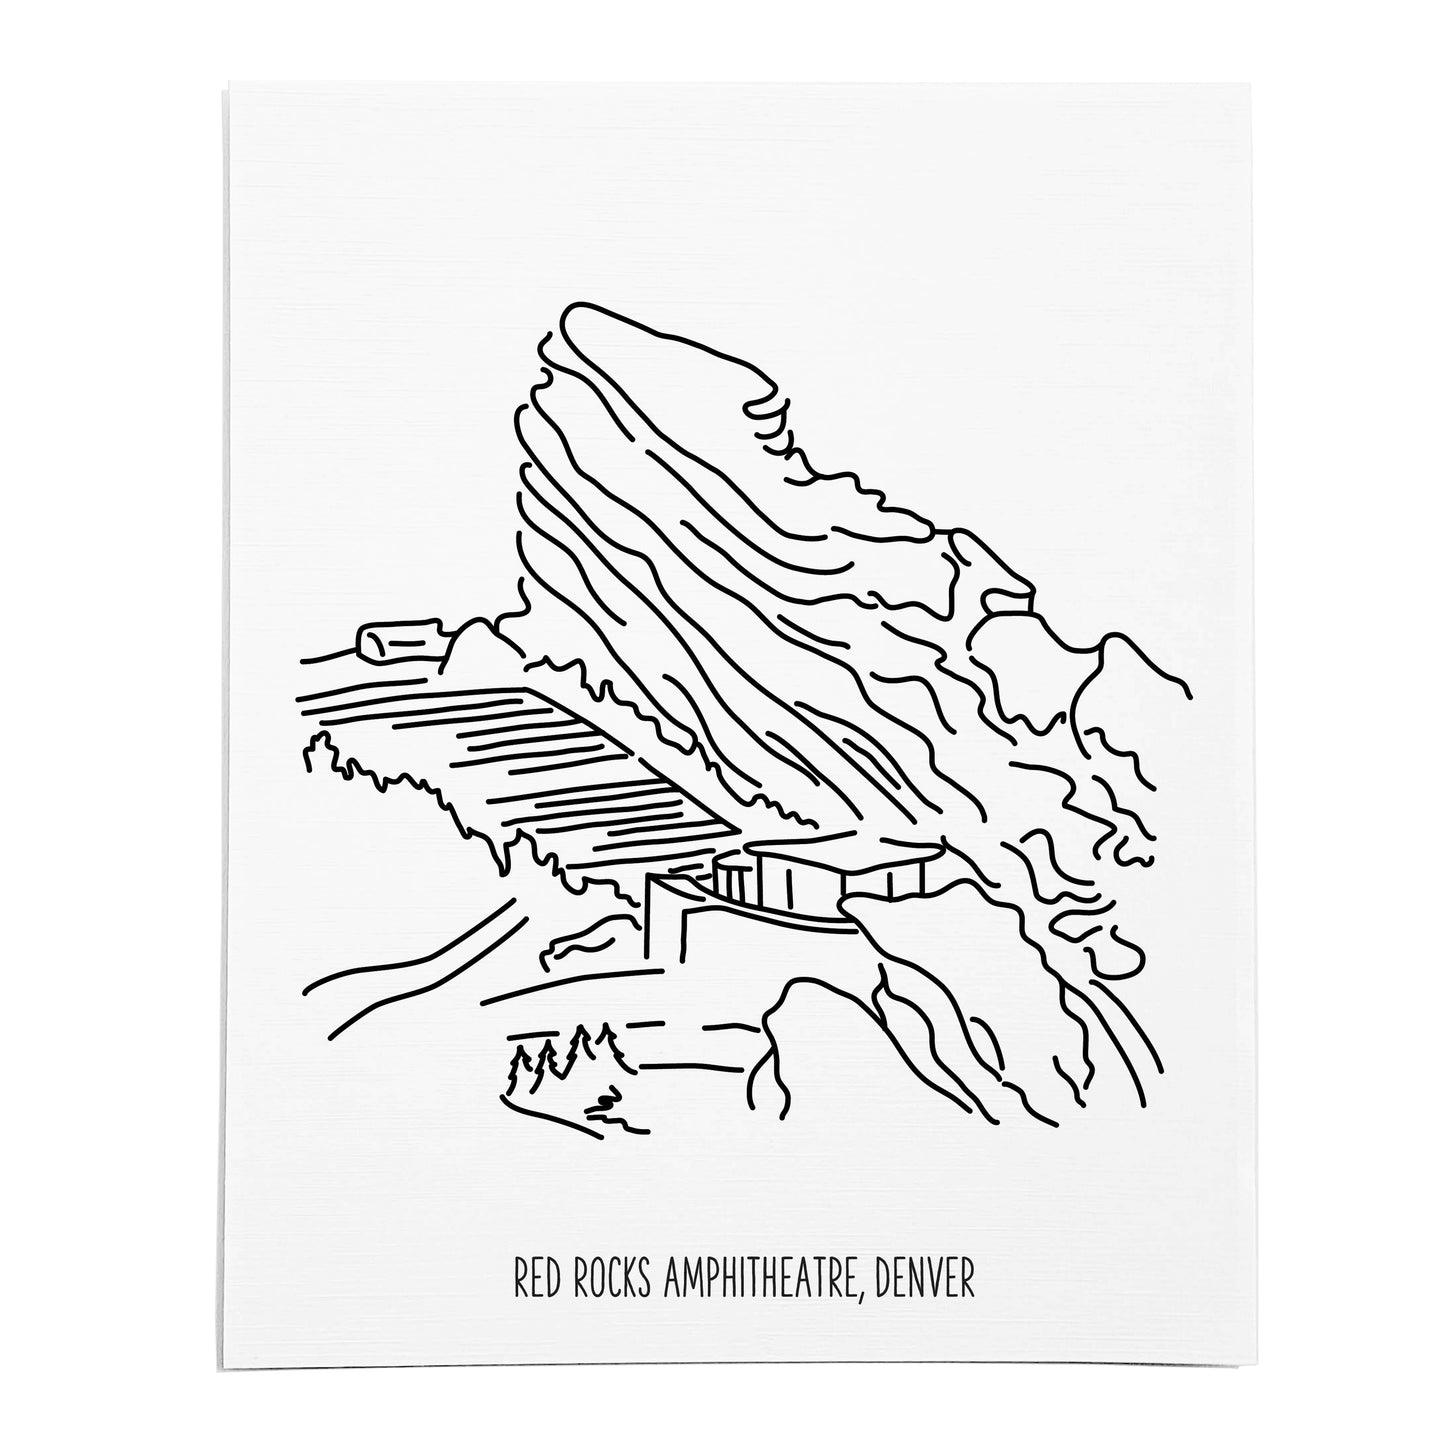 An art print featuring a line drawing of the Red Rocks Amphitheatre on white linen paper